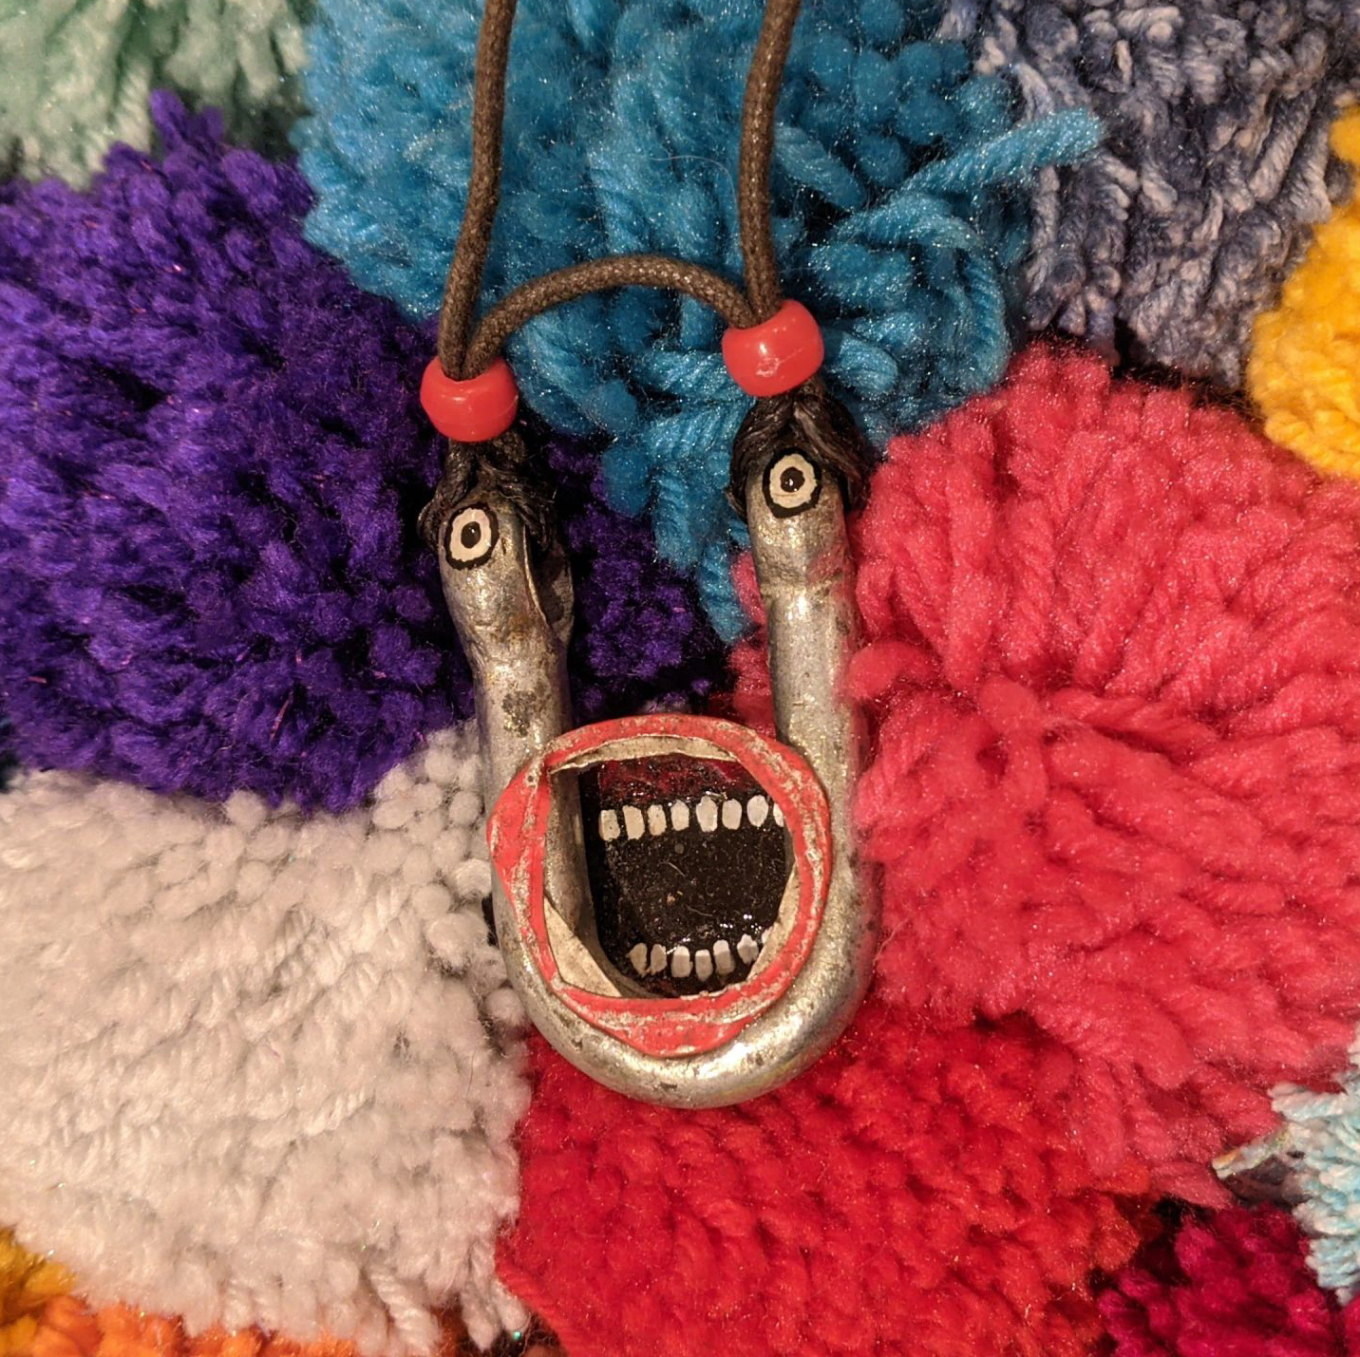 A small pendent featuring a screaming mouth sits on a bed of pom poms